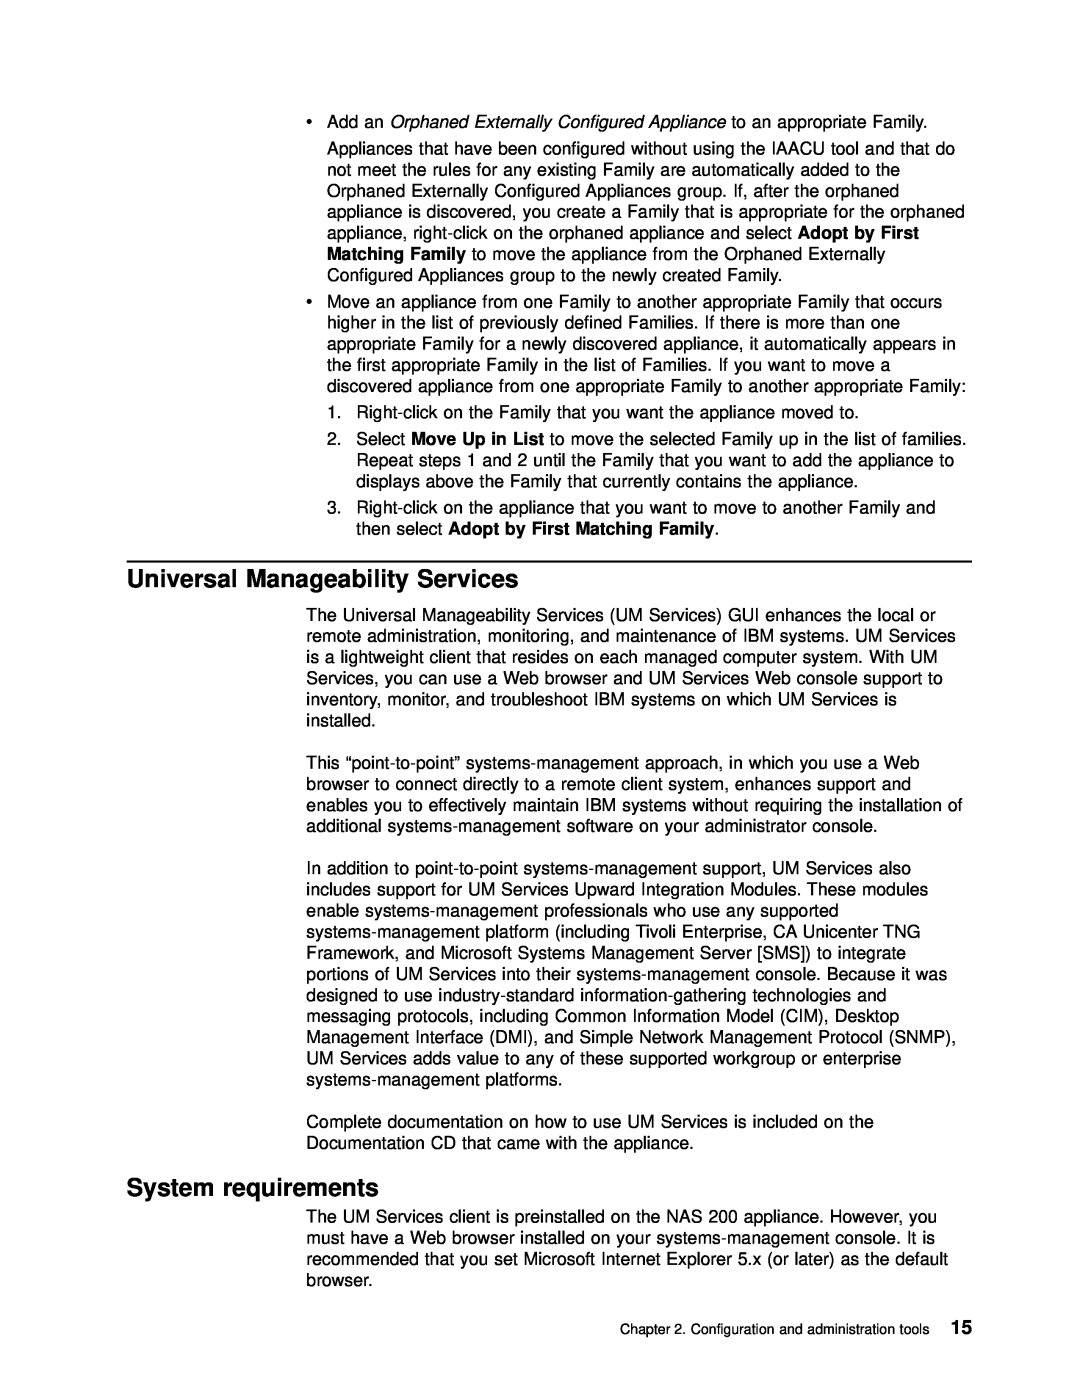 IBM 201 manual Universal Manageability Services, System requirements 